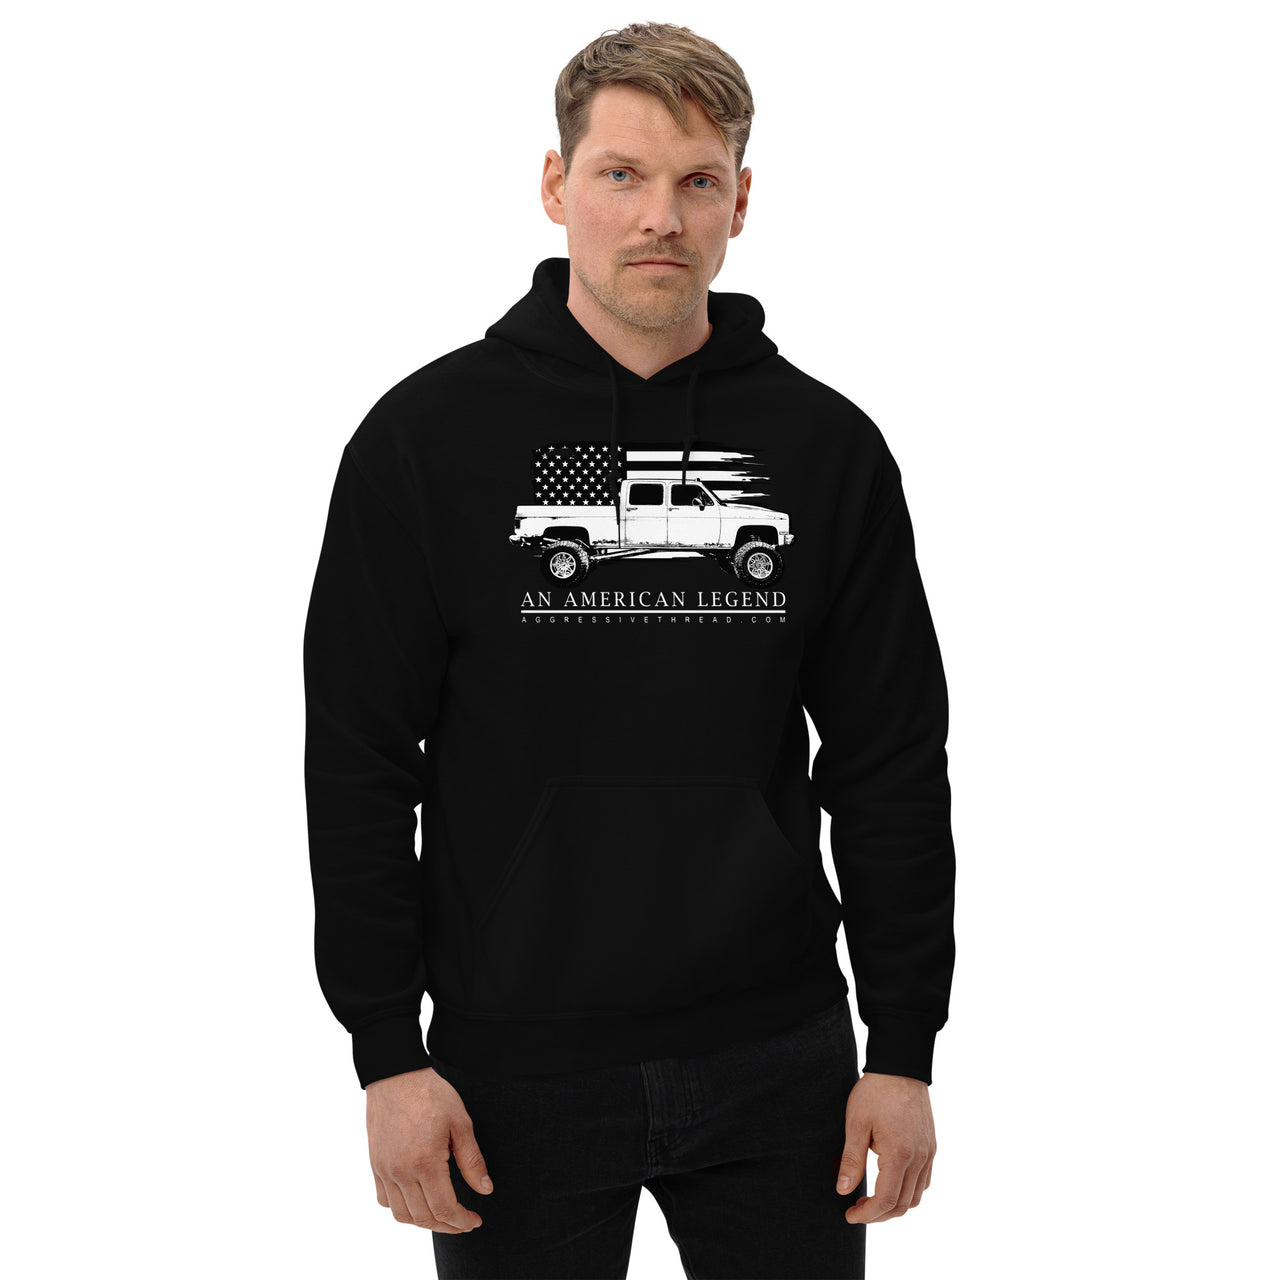 man modeling a Square Body Truck Hoodie in black